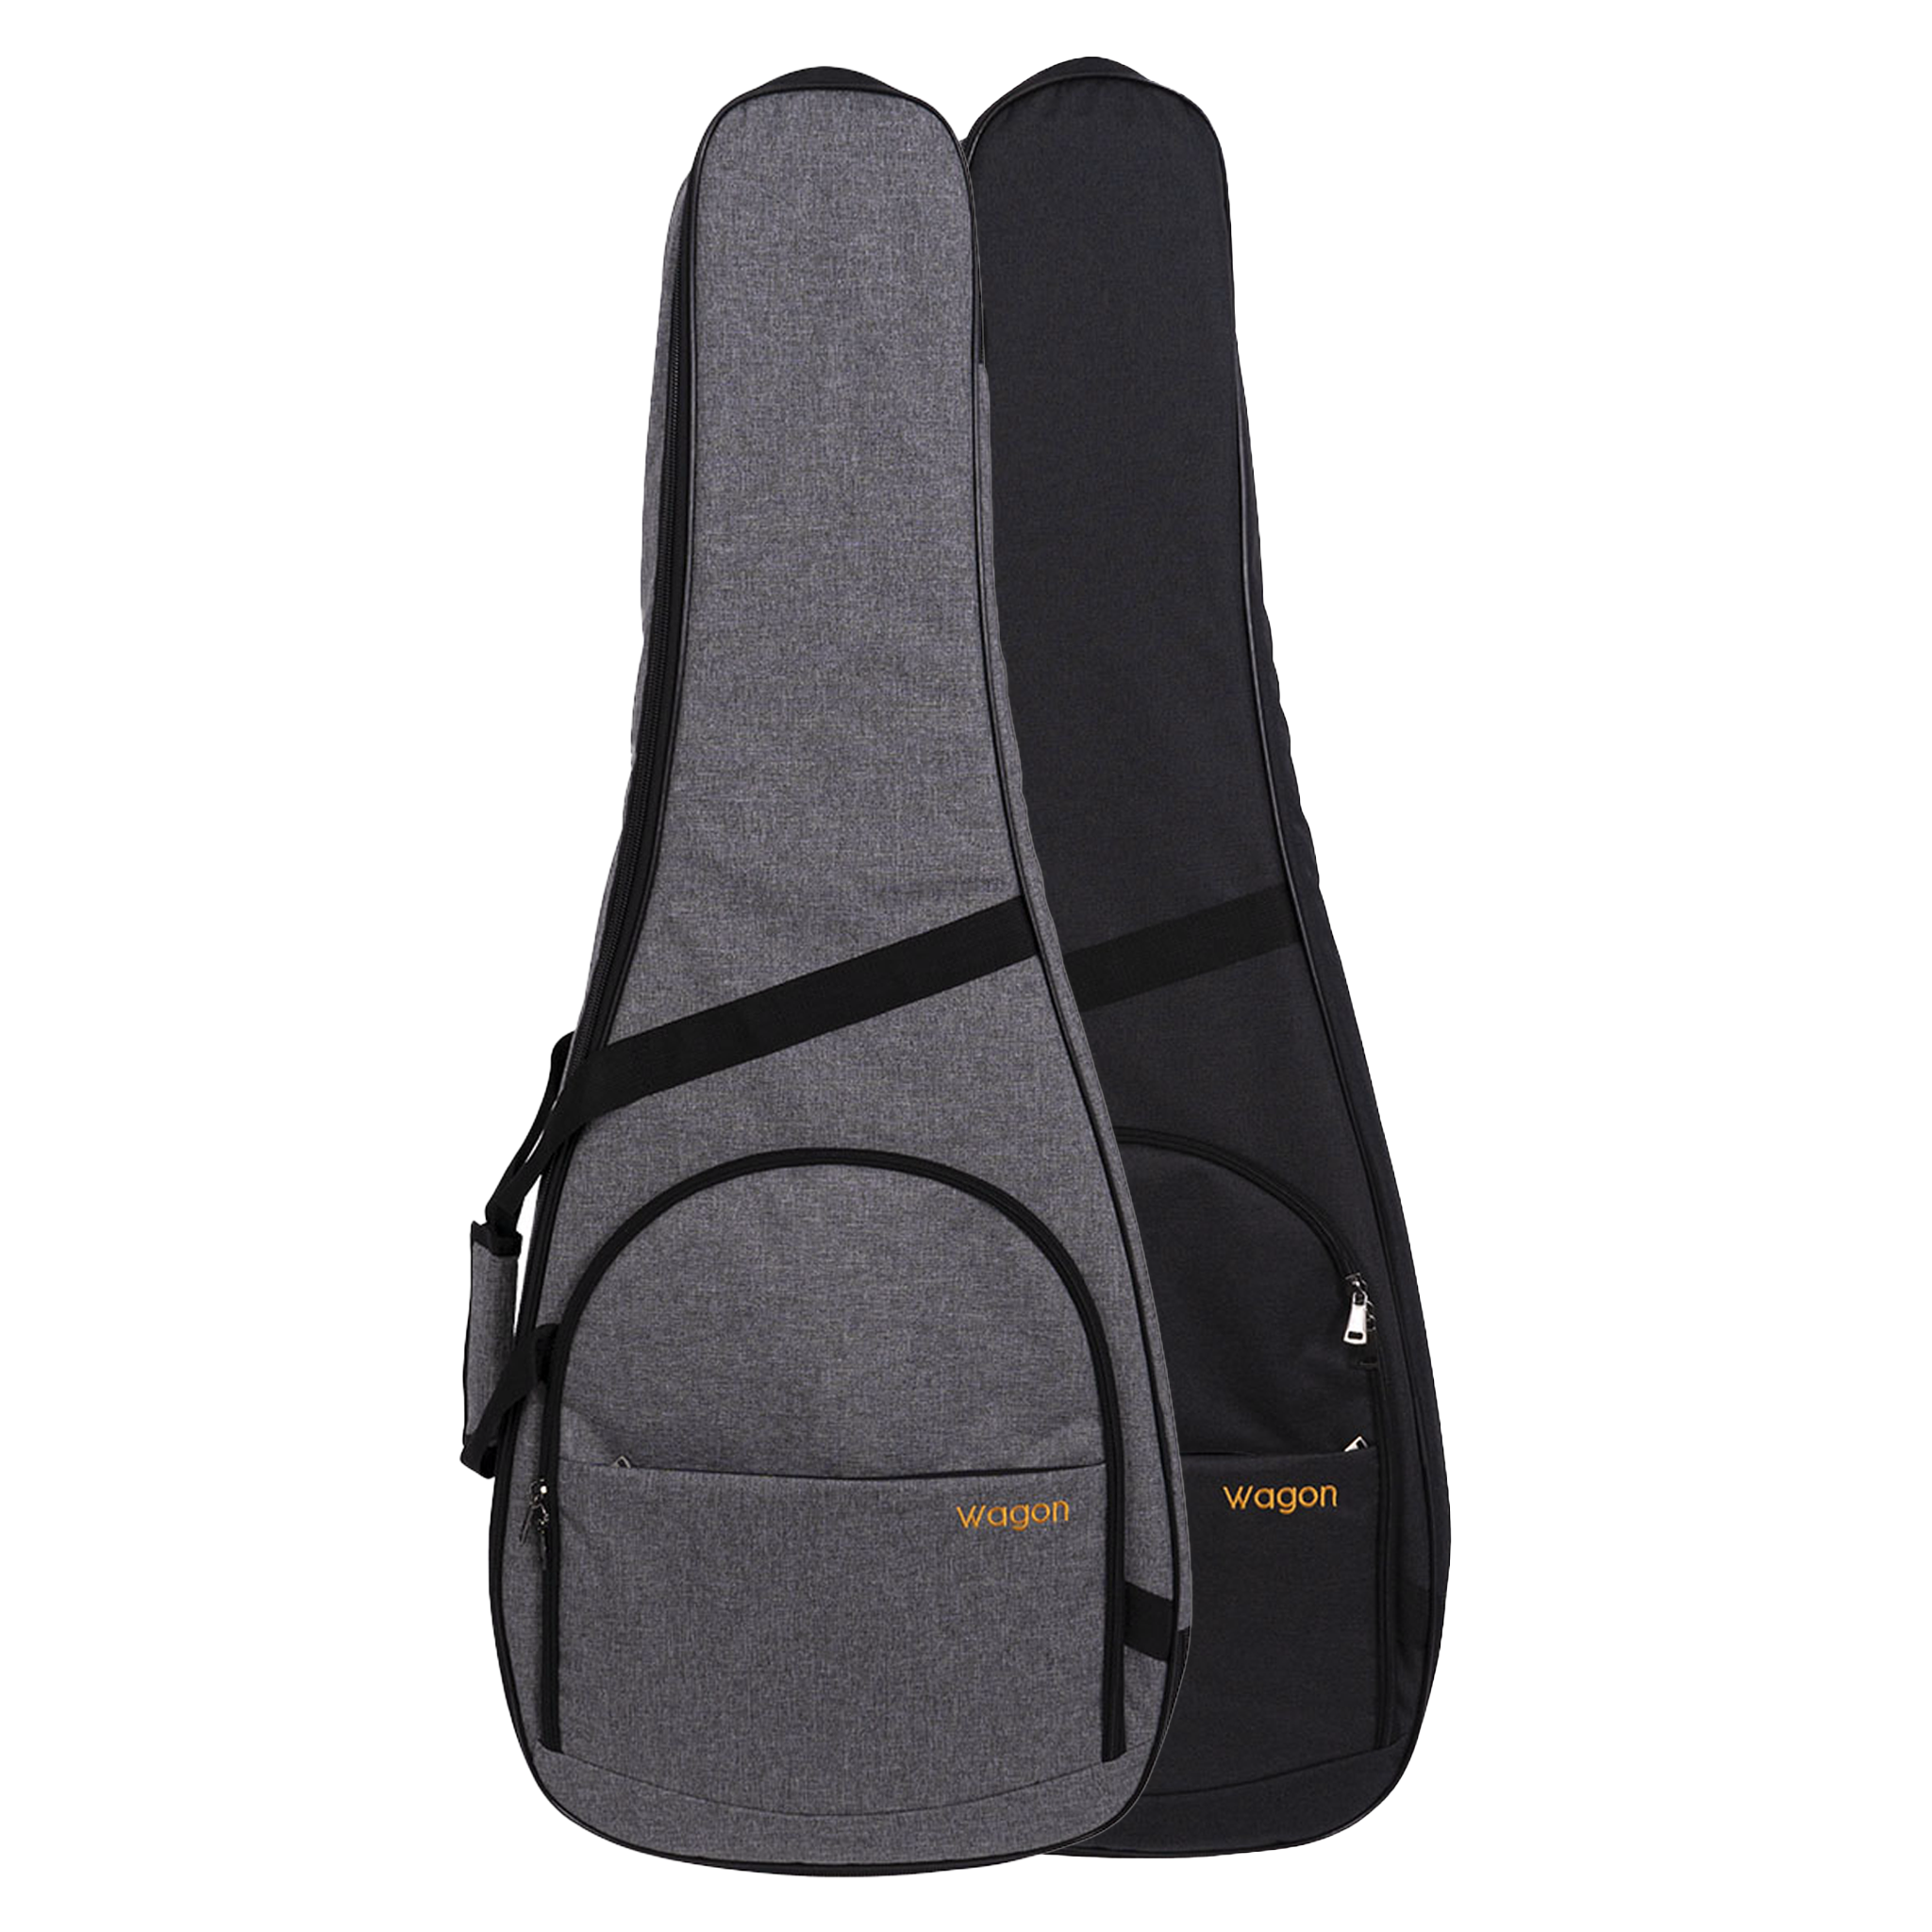 Buy Bluegrass Acoustic Guitar Bag Online in India | Best Cases & Gigbags  Guitar Accessories in India